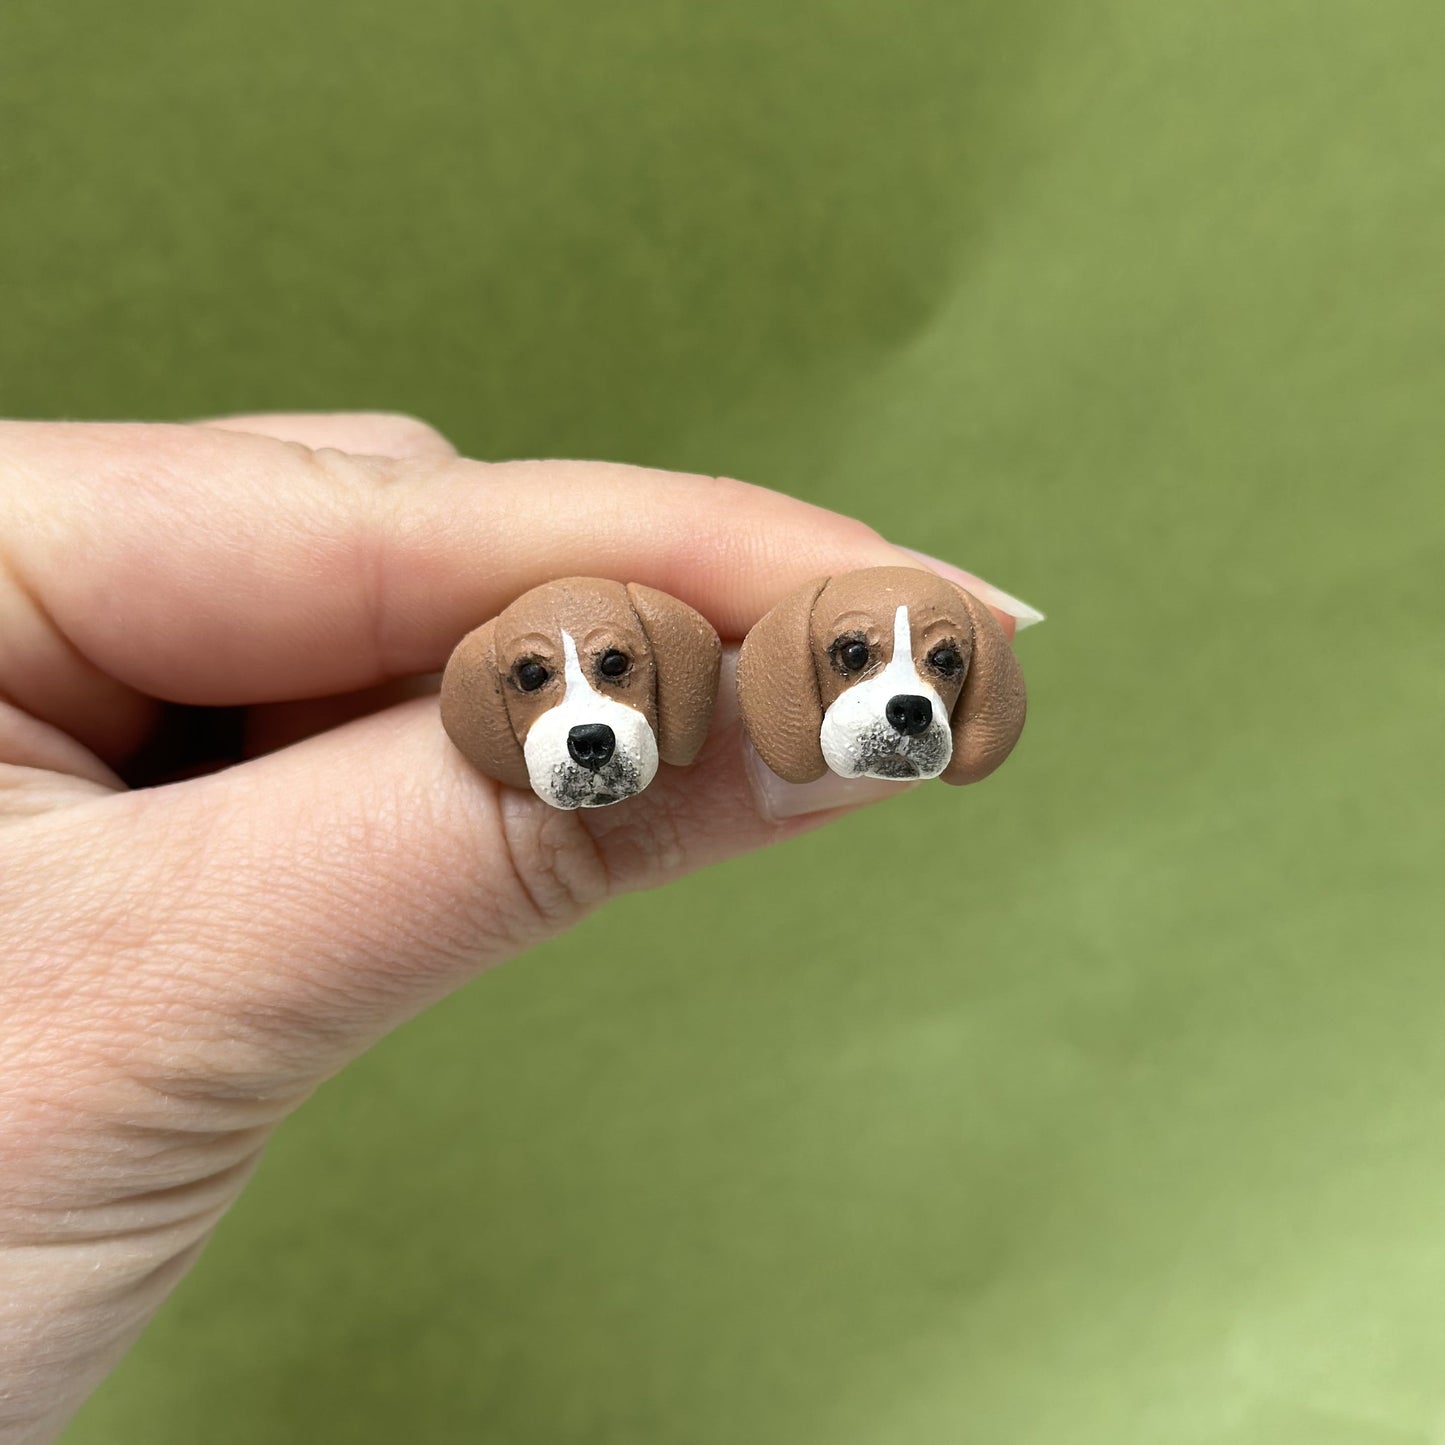 Handmade beagle stud earrings by Pawfect Love, positioned in front of green background